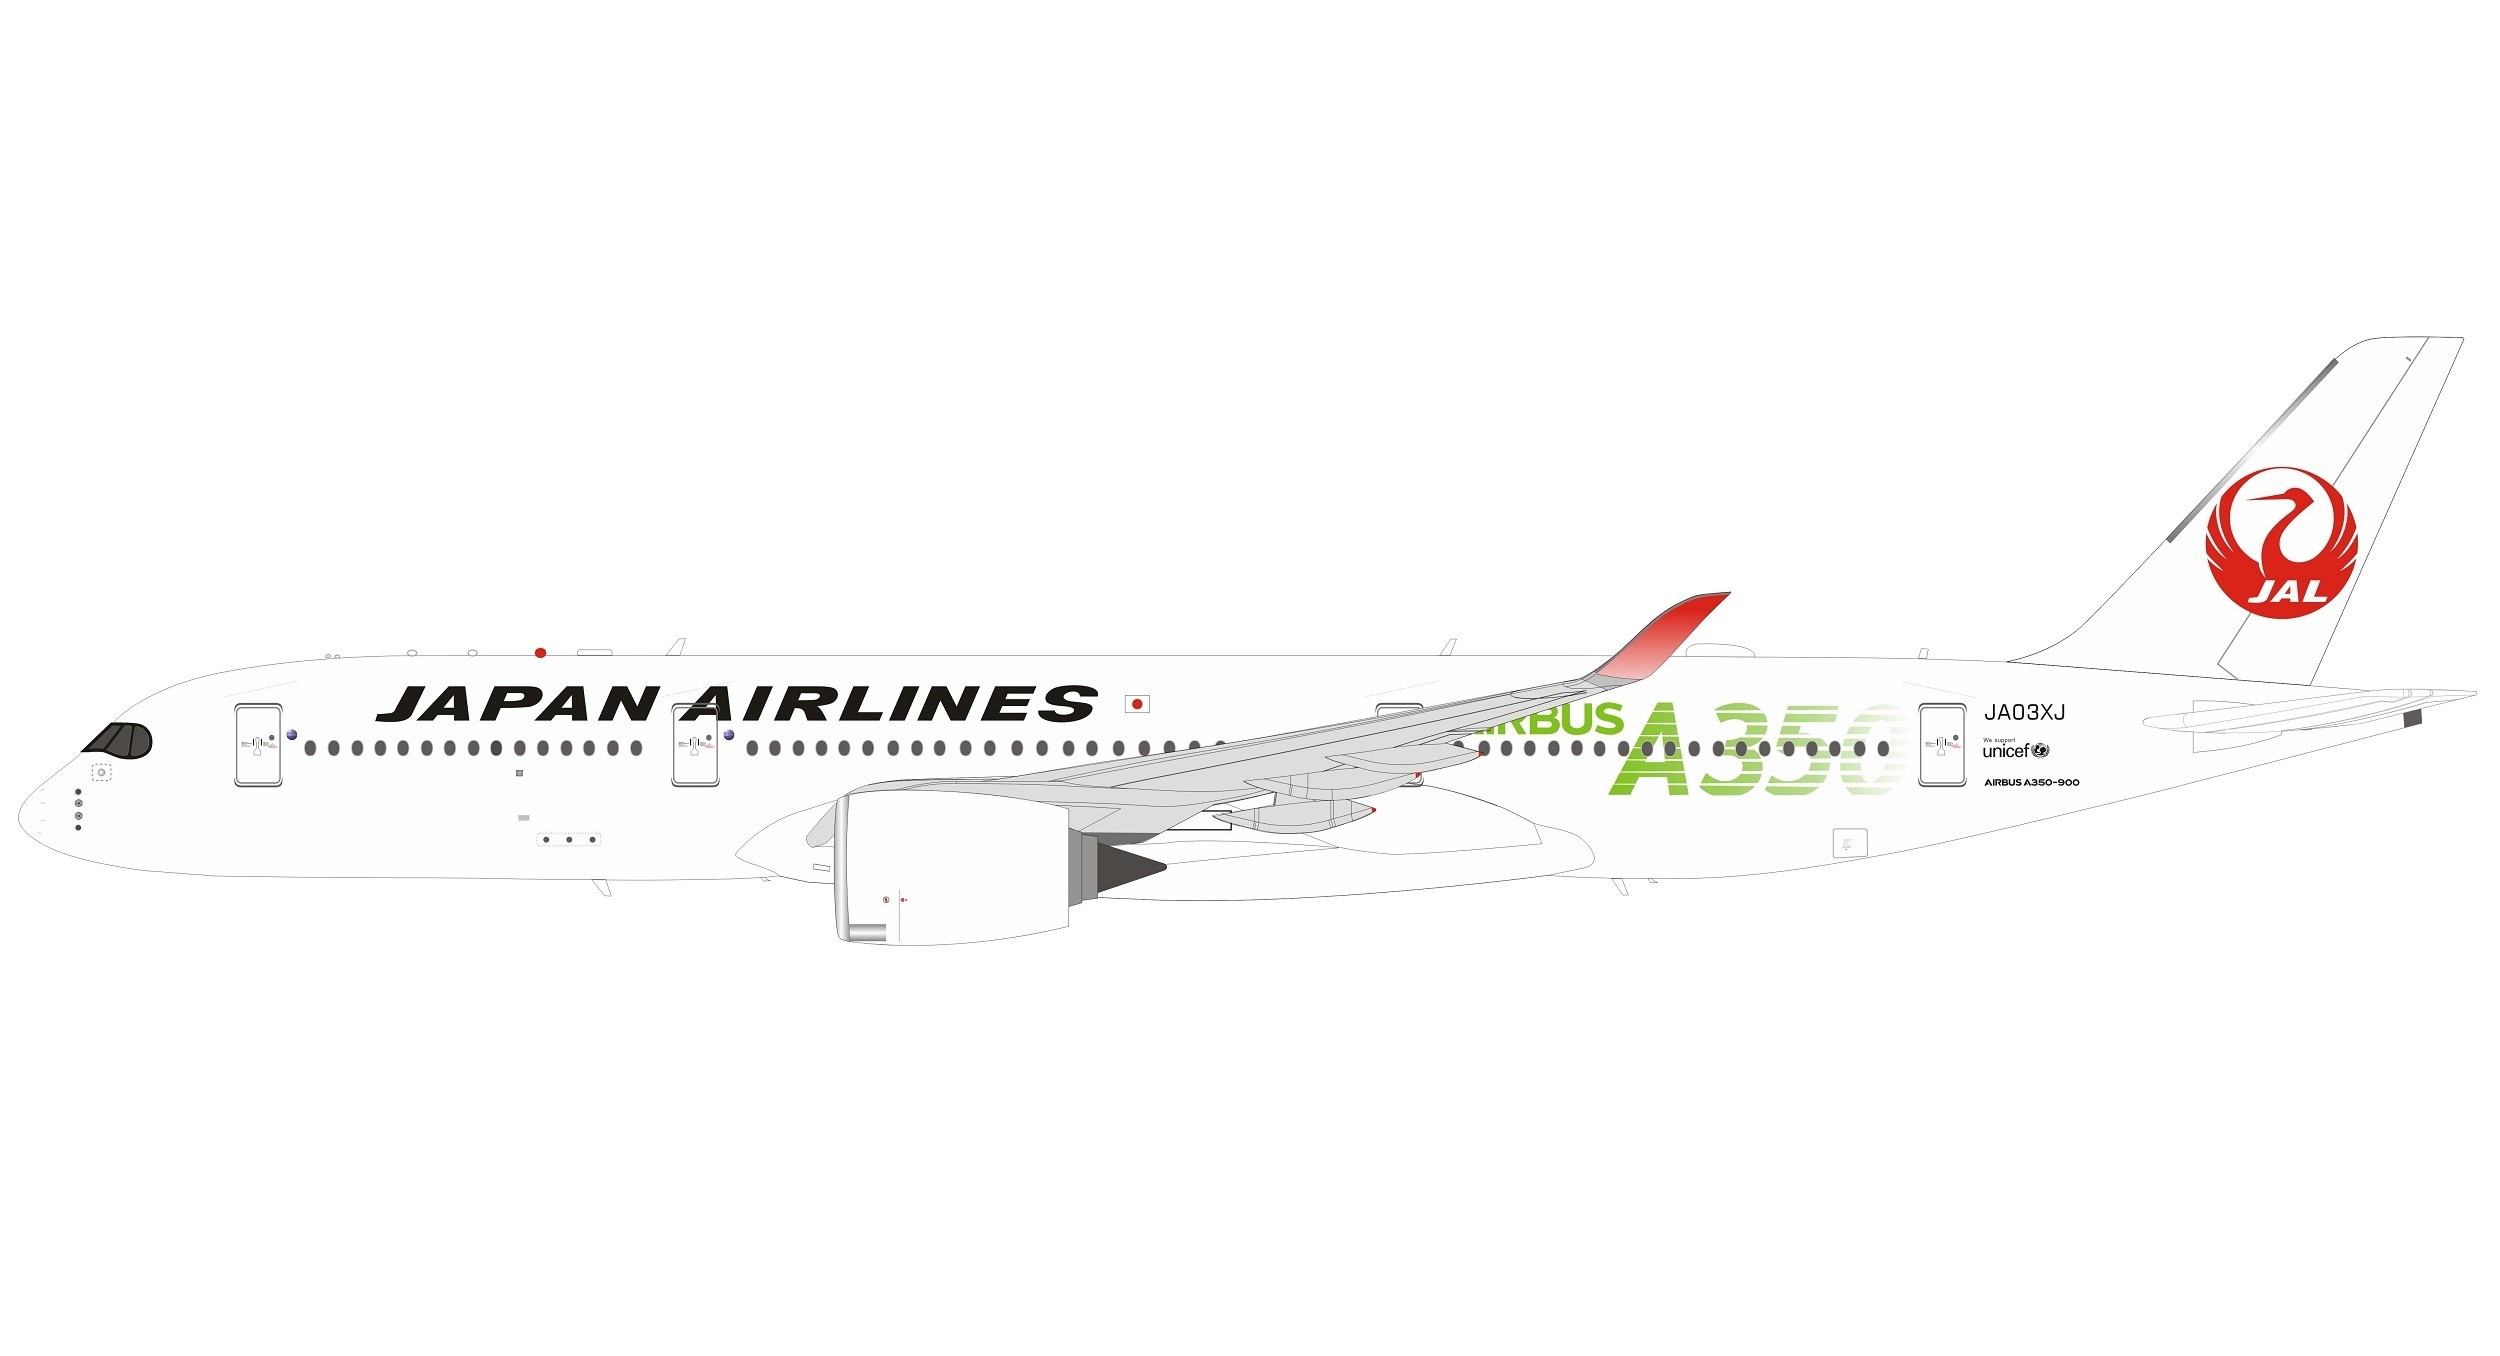 JAL Japan Airlines Airbus A350-900 JA03XJ Green logo with stand  InFlight/B-Models B-350-JA-03 scale 1:200